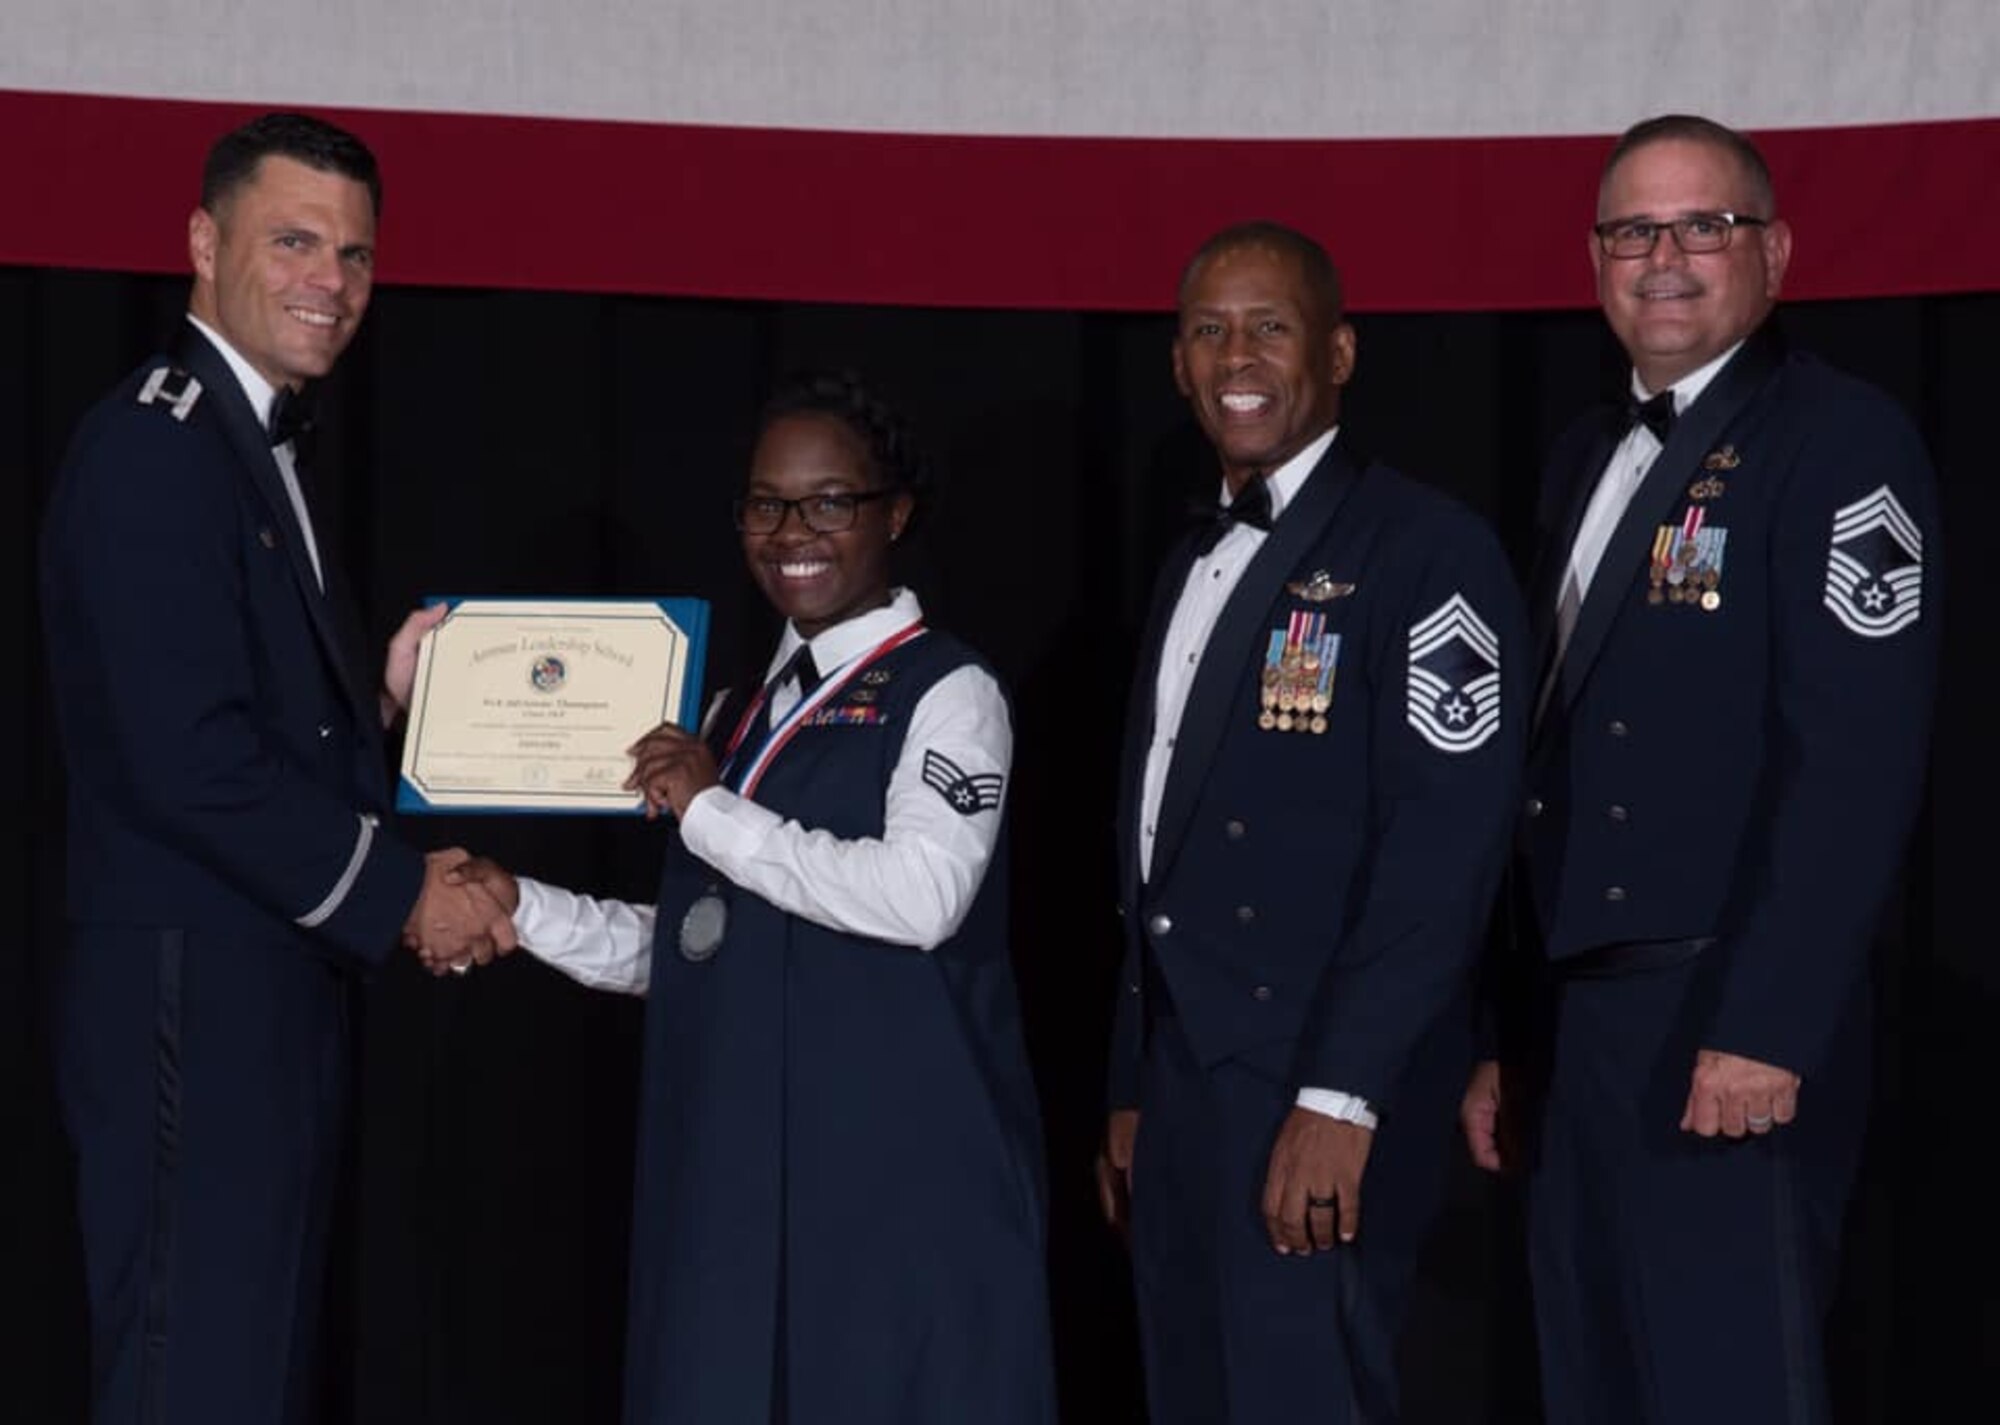 Congratulations to Senior Airman Adrienne Thompson, who completed Airman Leadership School Aug. 22, 2019, at McConnell Air Force Base, Kan.